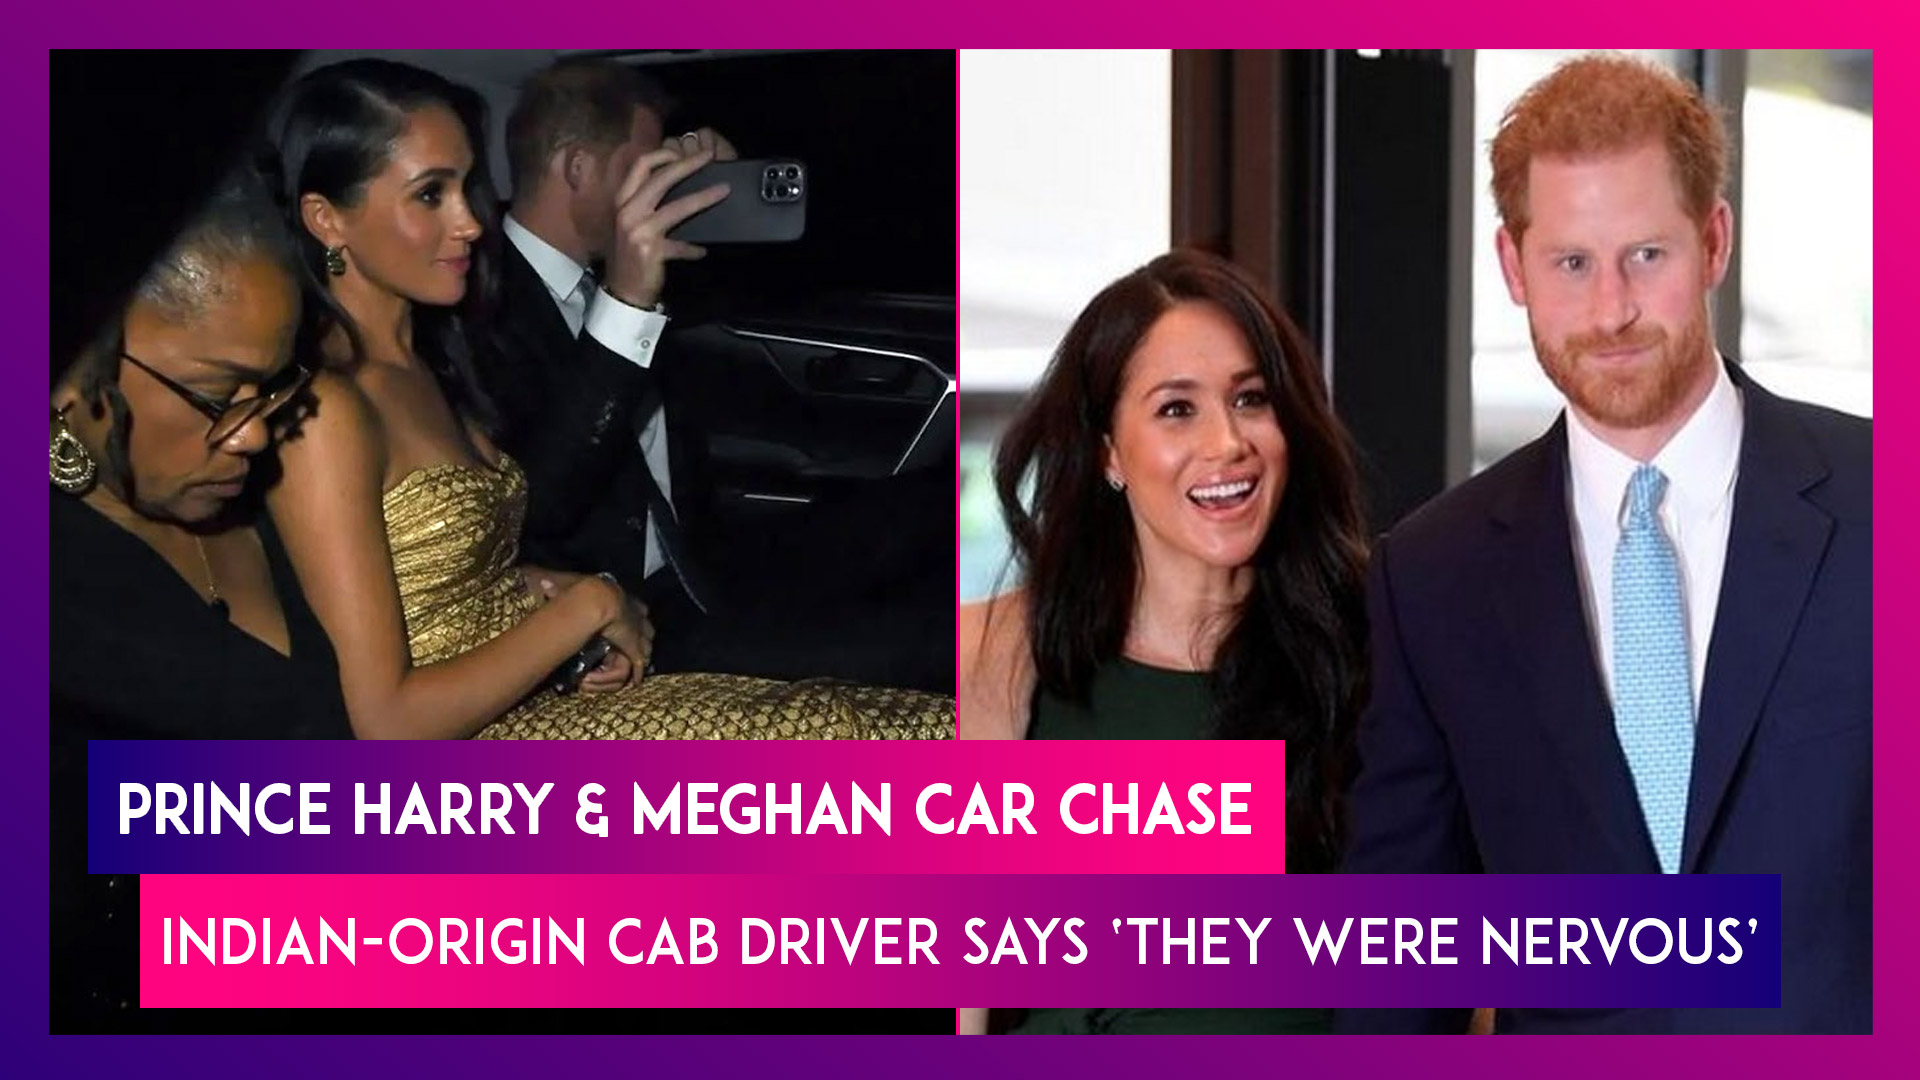 Indian-Origin Taxi Driver Sukhcharn Singh Who Picked Prince Harry & Meghan After Car Chase By Paps Says ‘They Were Nervous’